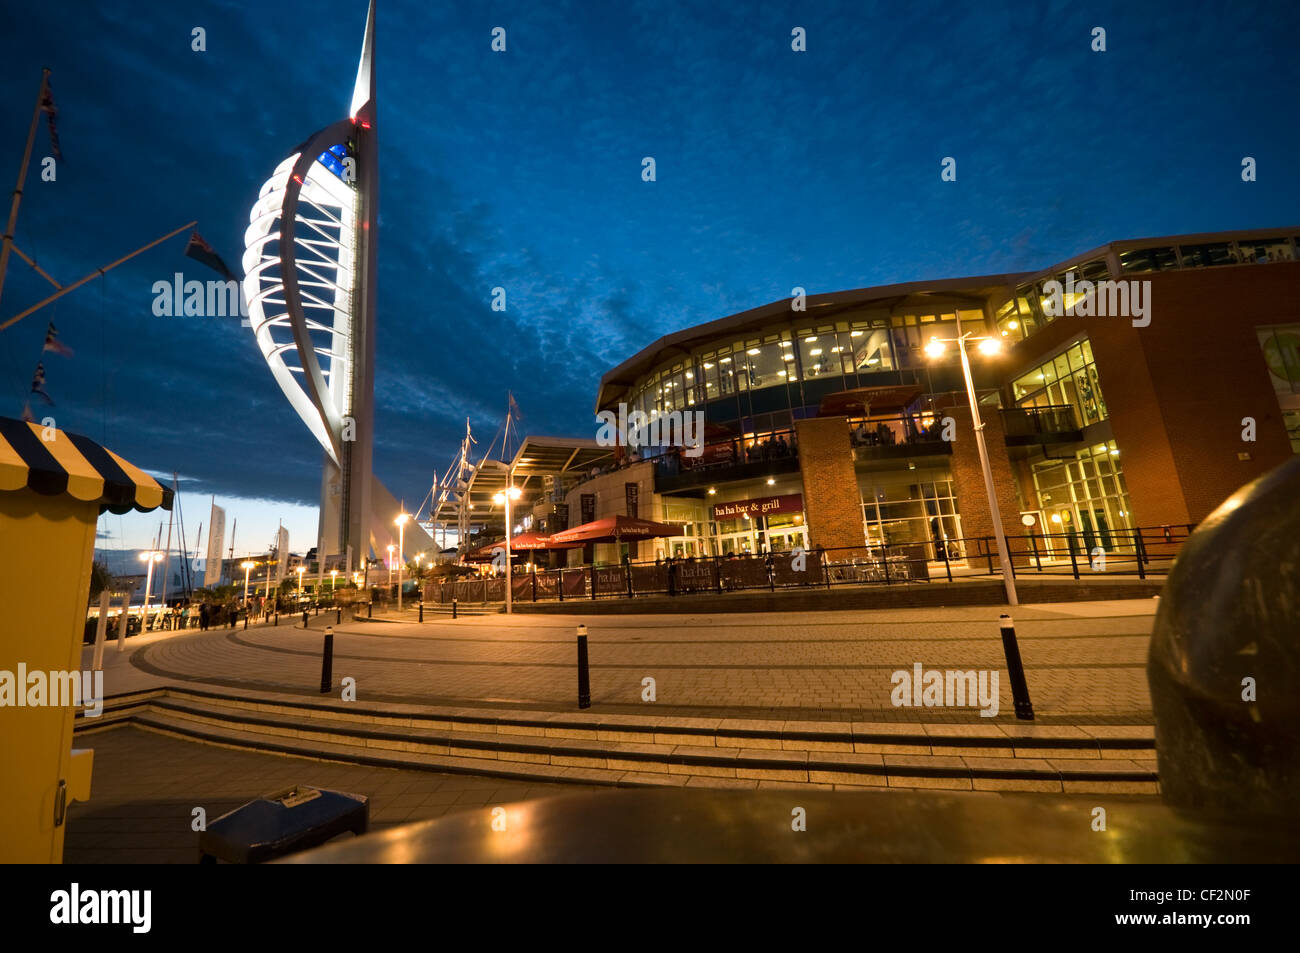 An early evening view of the 170m high Spinnaker Tower at Gunwharf Quays in Portsmouth Harbour. The tower offers breathtaking vi Stock Photo